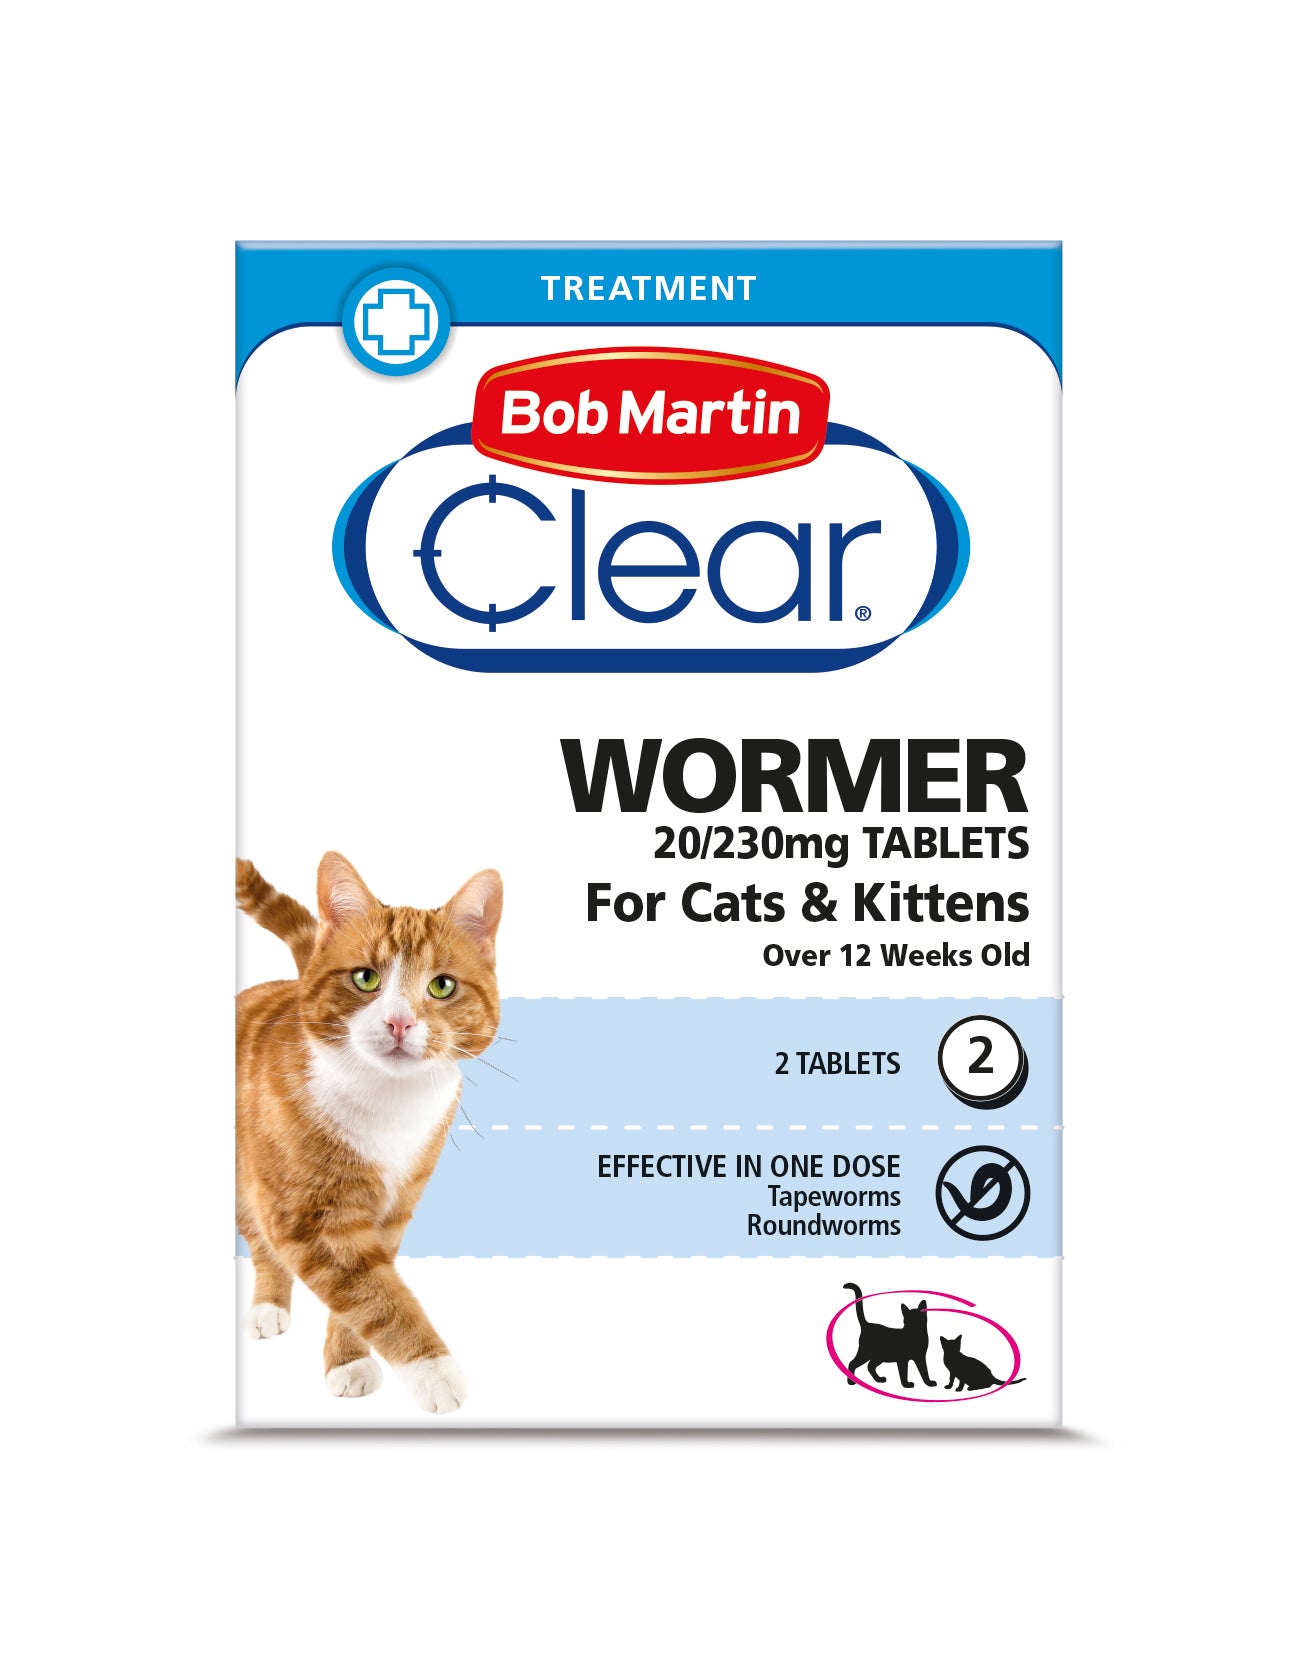 Bob Martin Clear Wormer for Cats and Kittens - 2 Tablets